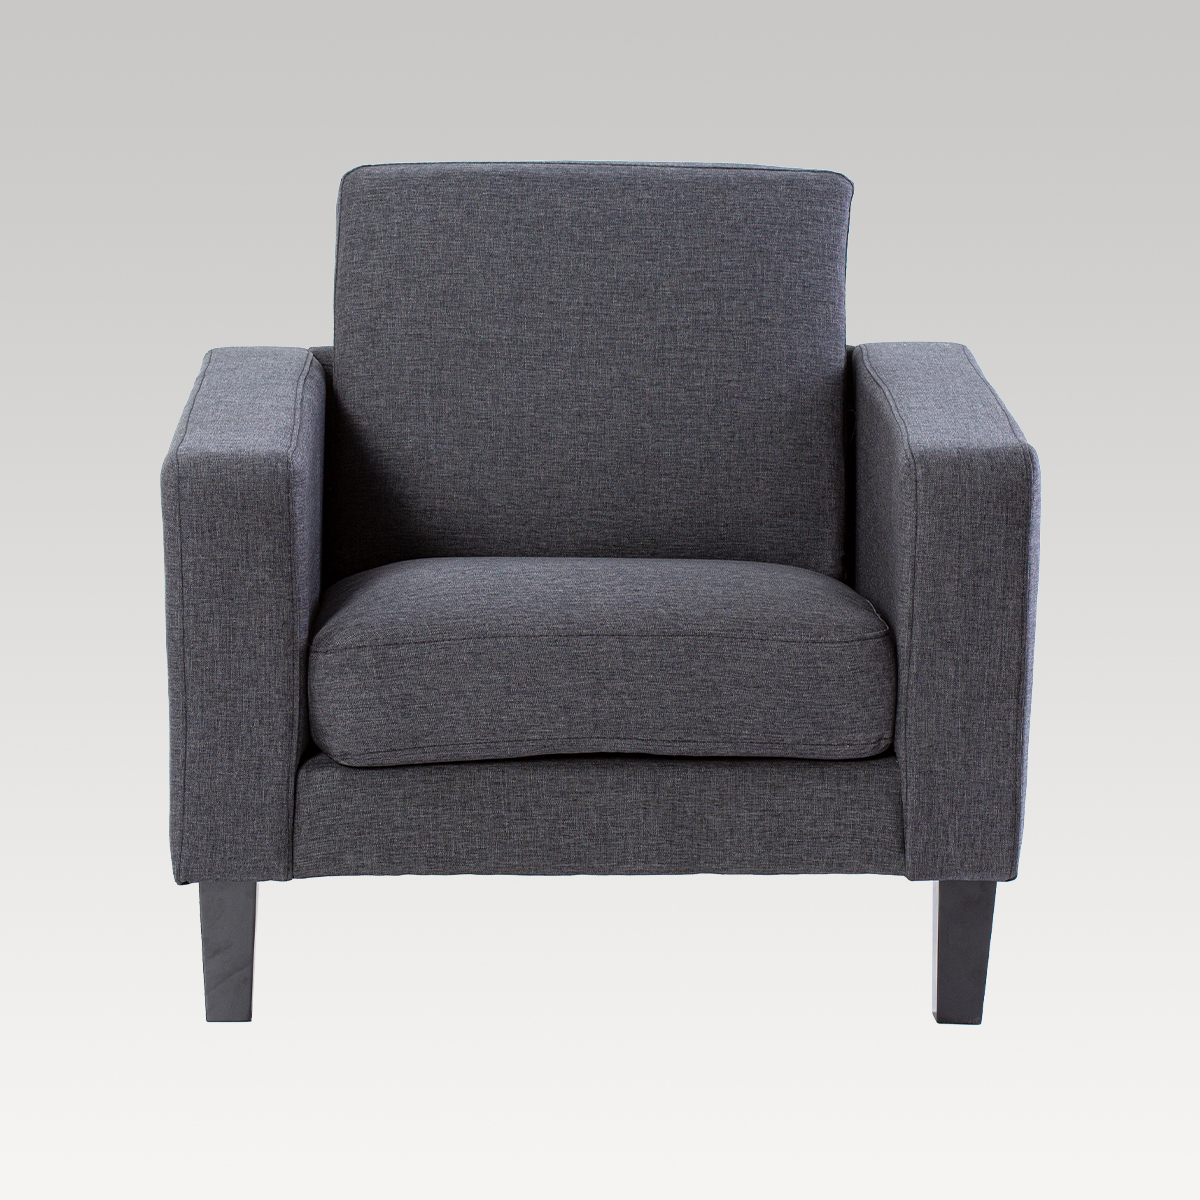 Image of Makers Fenix Fabric Single Seater Chair - Charcoal